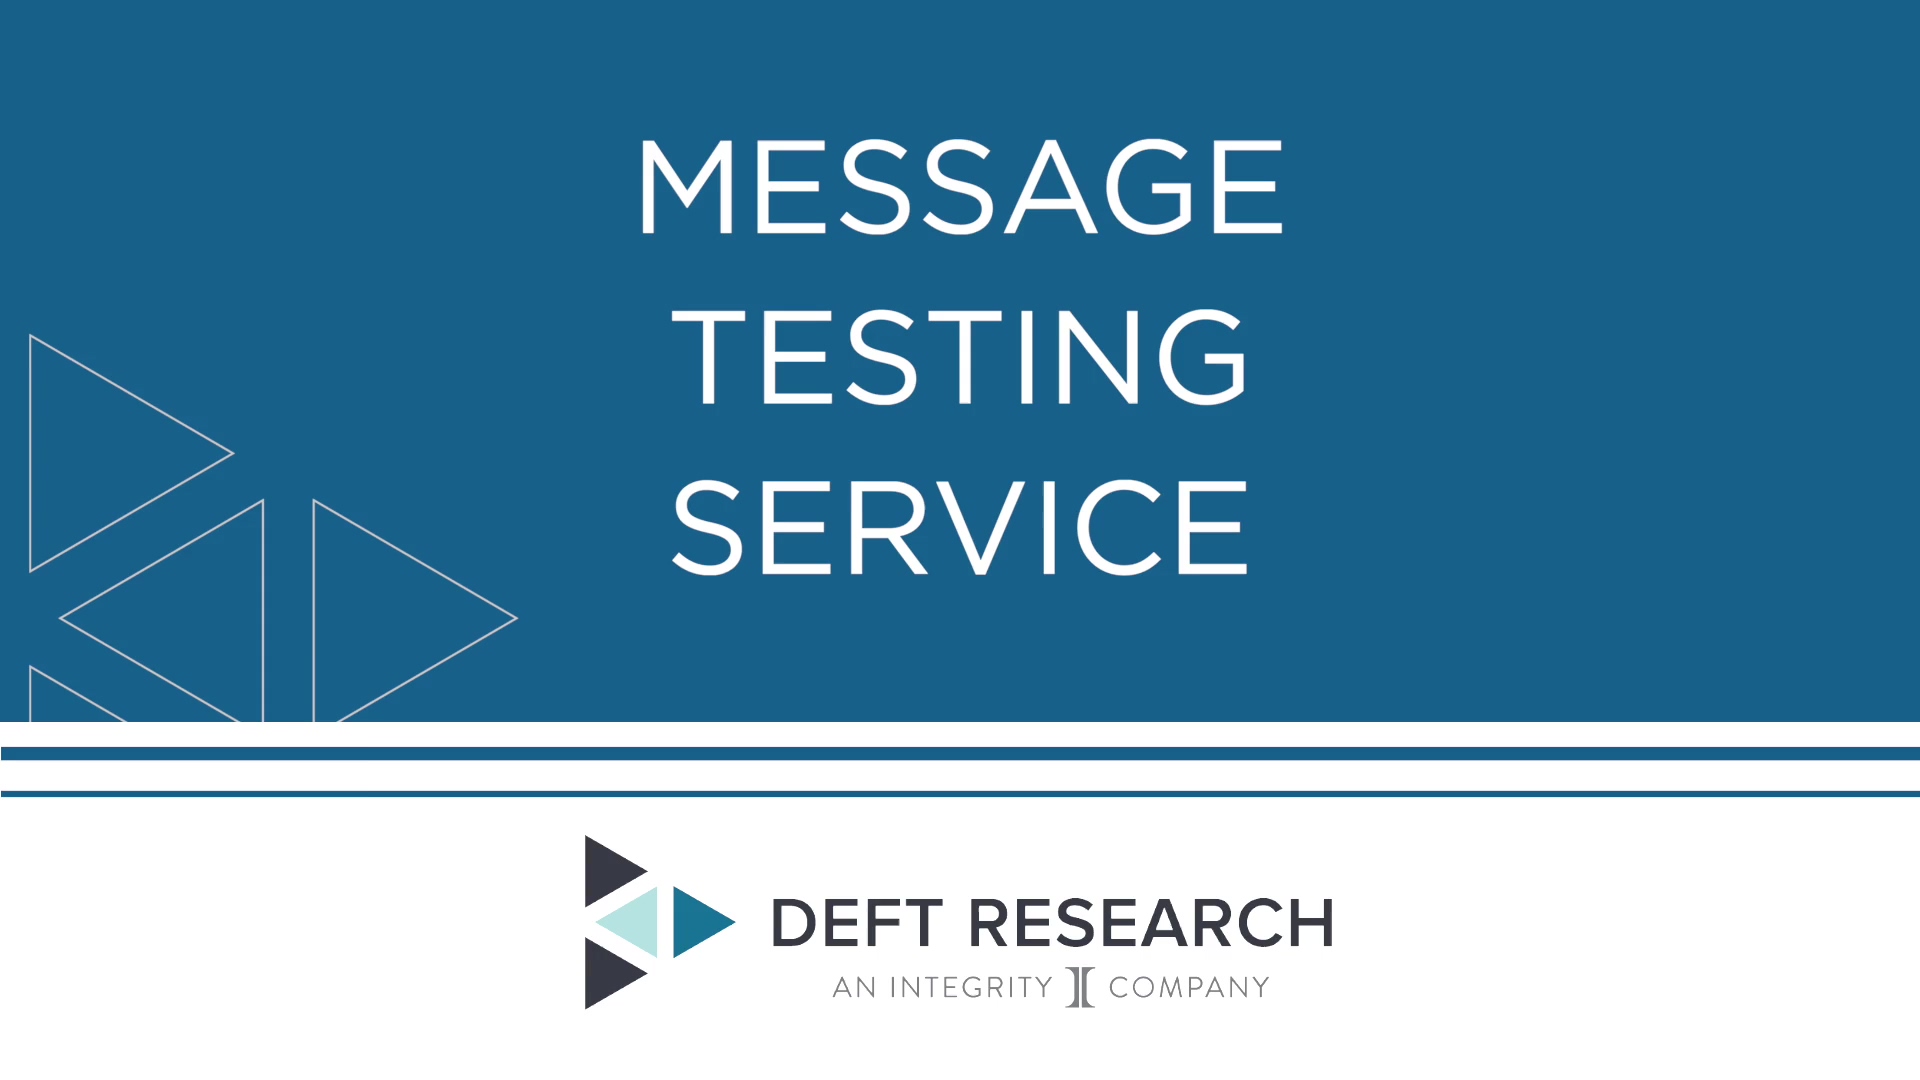 deft_research_-_message_testing_service_teaser.mp4 (1080p)